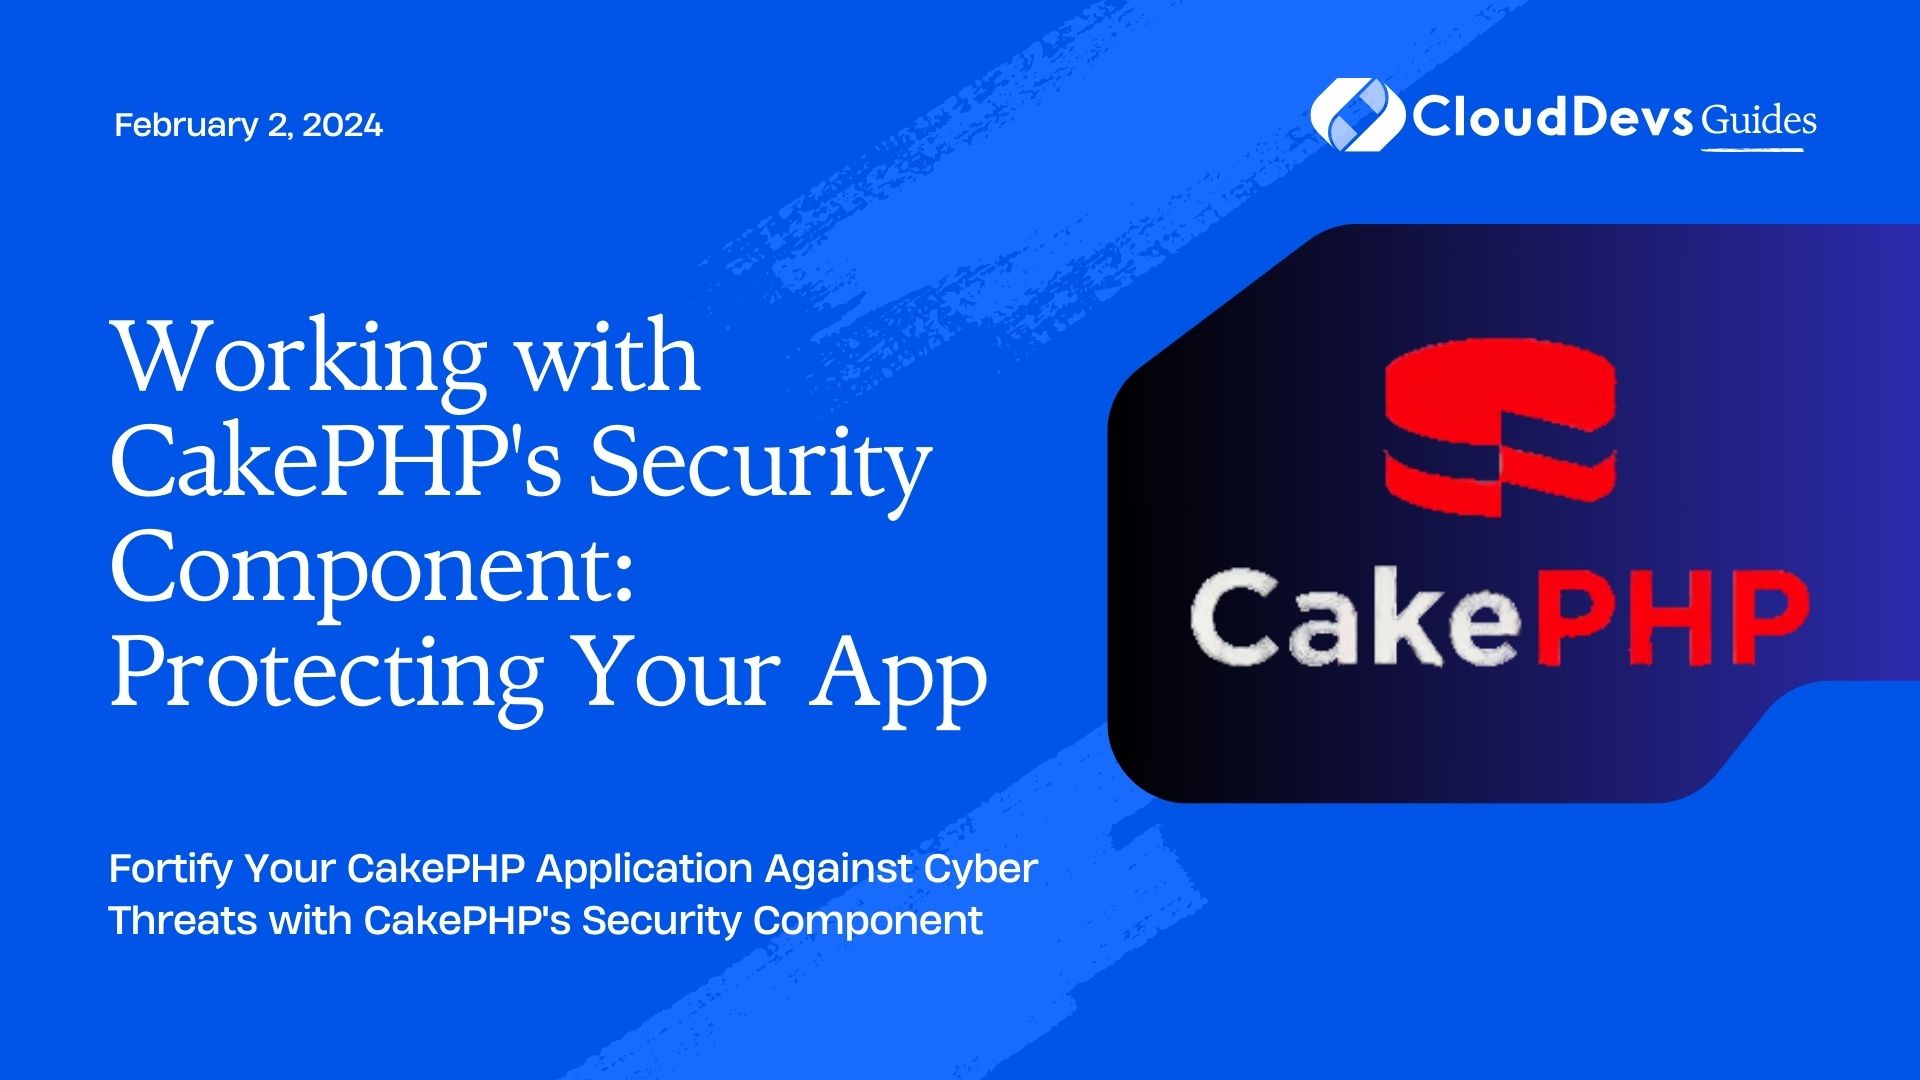 Working with CakePHP's Security Component: Protecting Your App